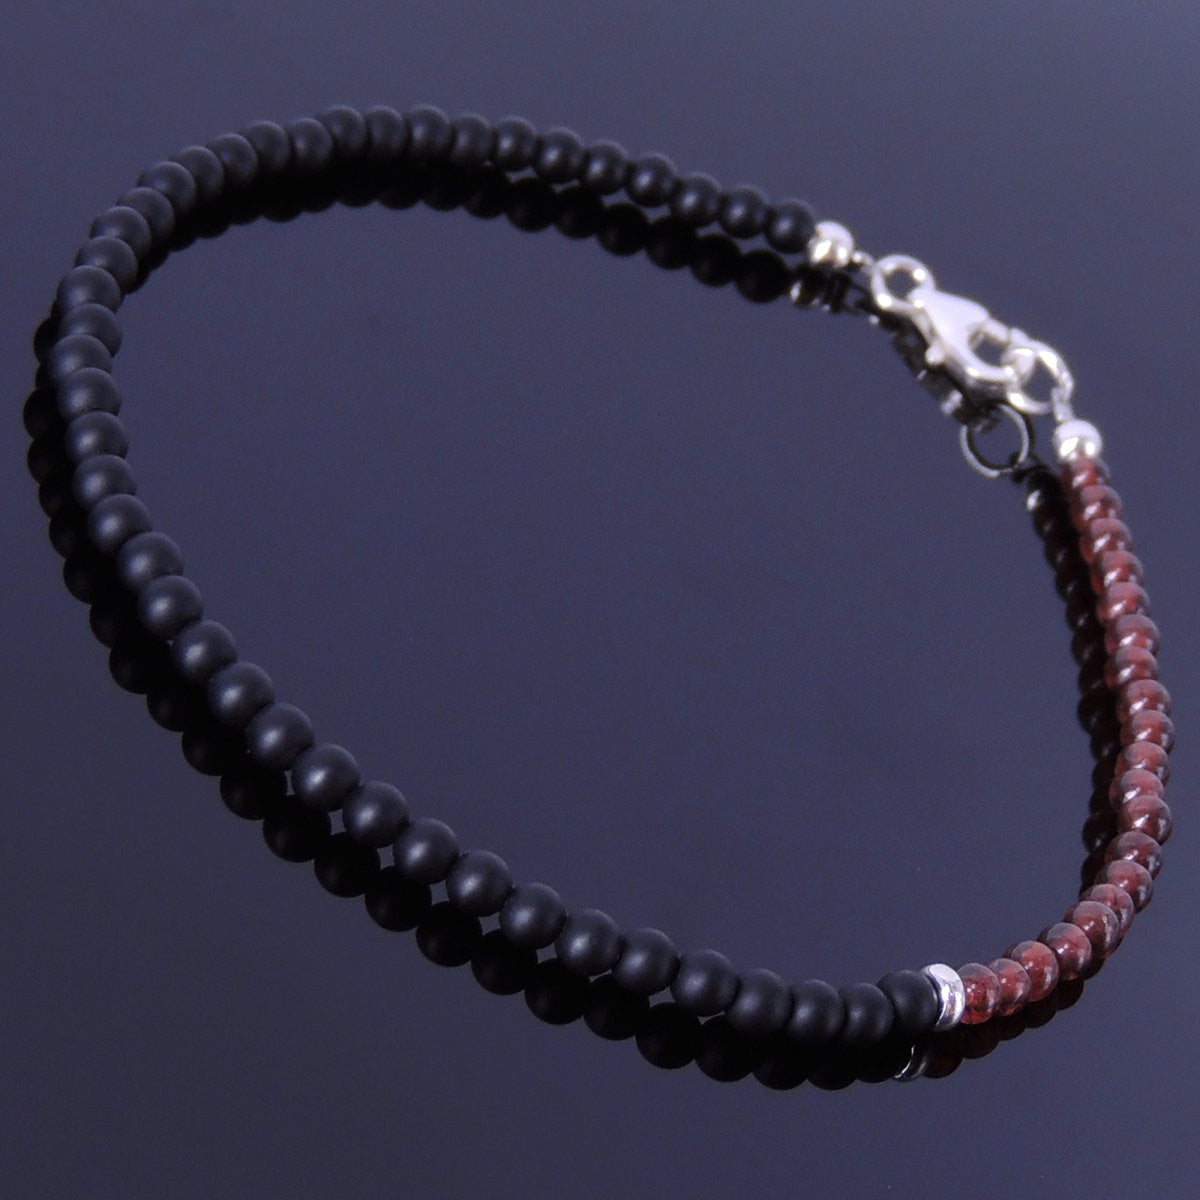 Natural Garnet and Matte Black Onyx Anklet with S925 Sterling Silver Clasp & Spacer - Handmade by Gem & Silver AN003